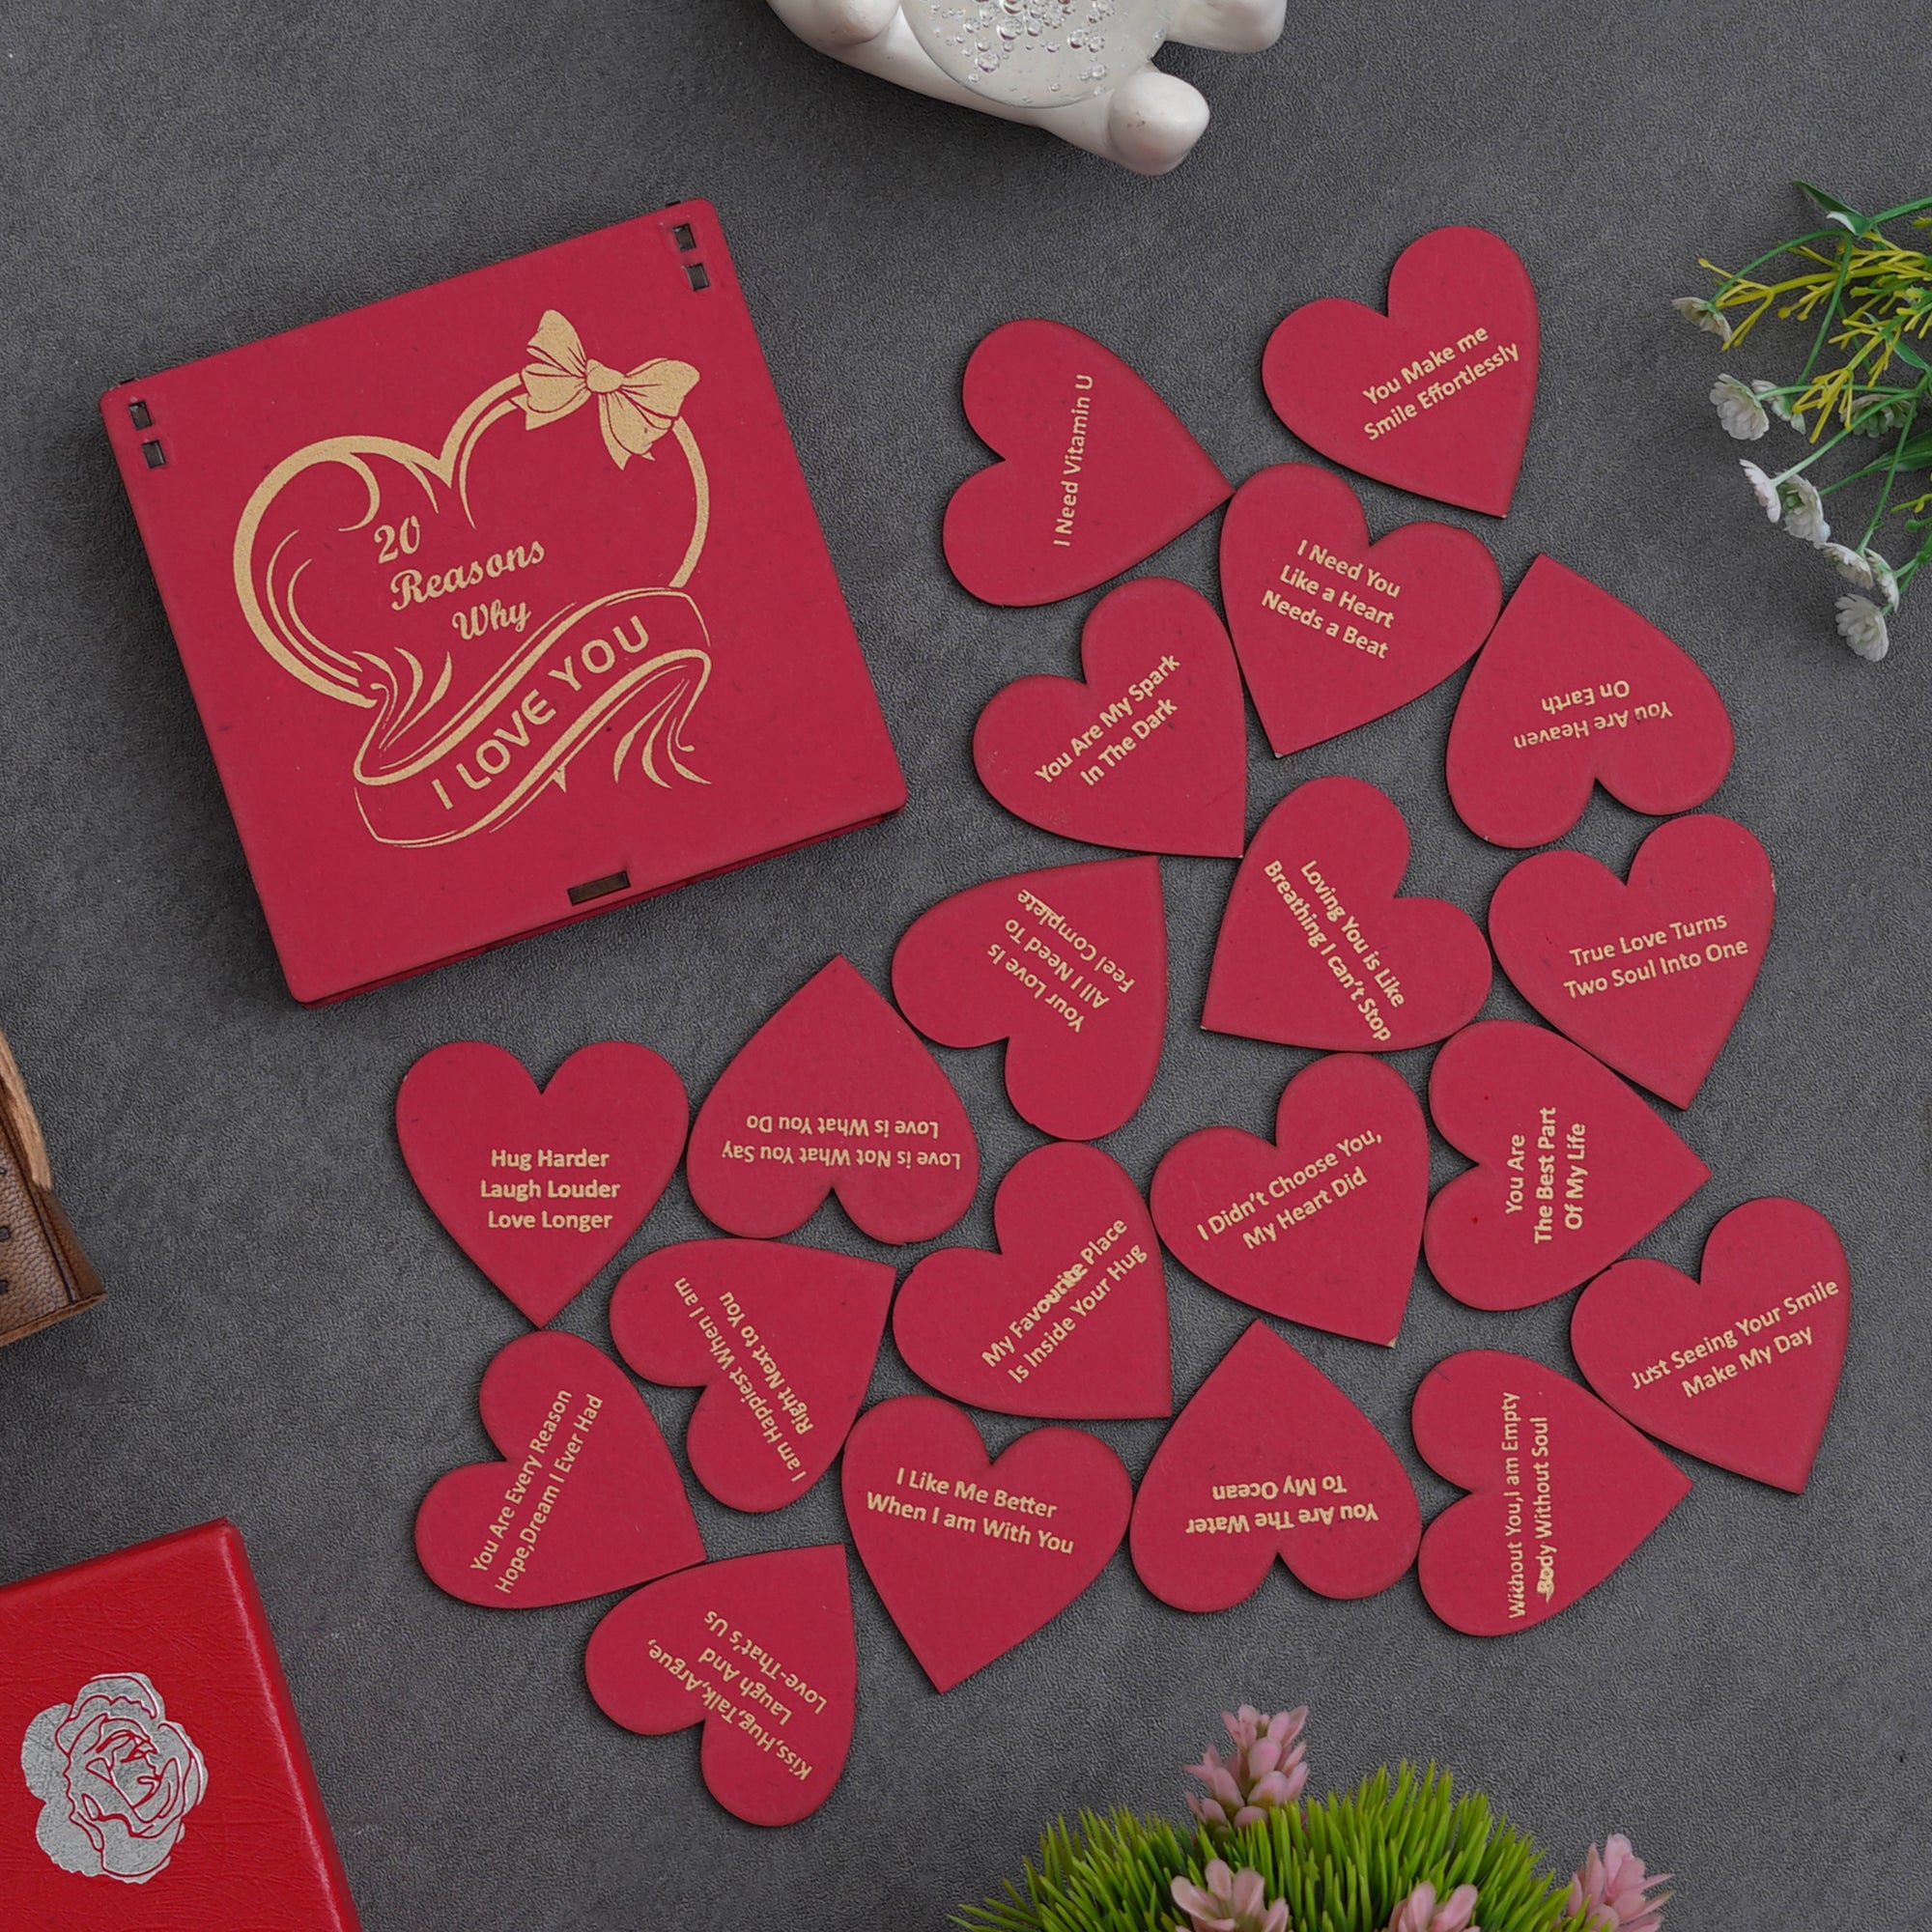 Valentine Combo of Pack of 12 Love Coupons Gift Cards Set, Golden Rose Gift Set, "20 Reasons Why I Love You" Printed on Little Red Hearts Decorative Wooden Gift Set Box 5